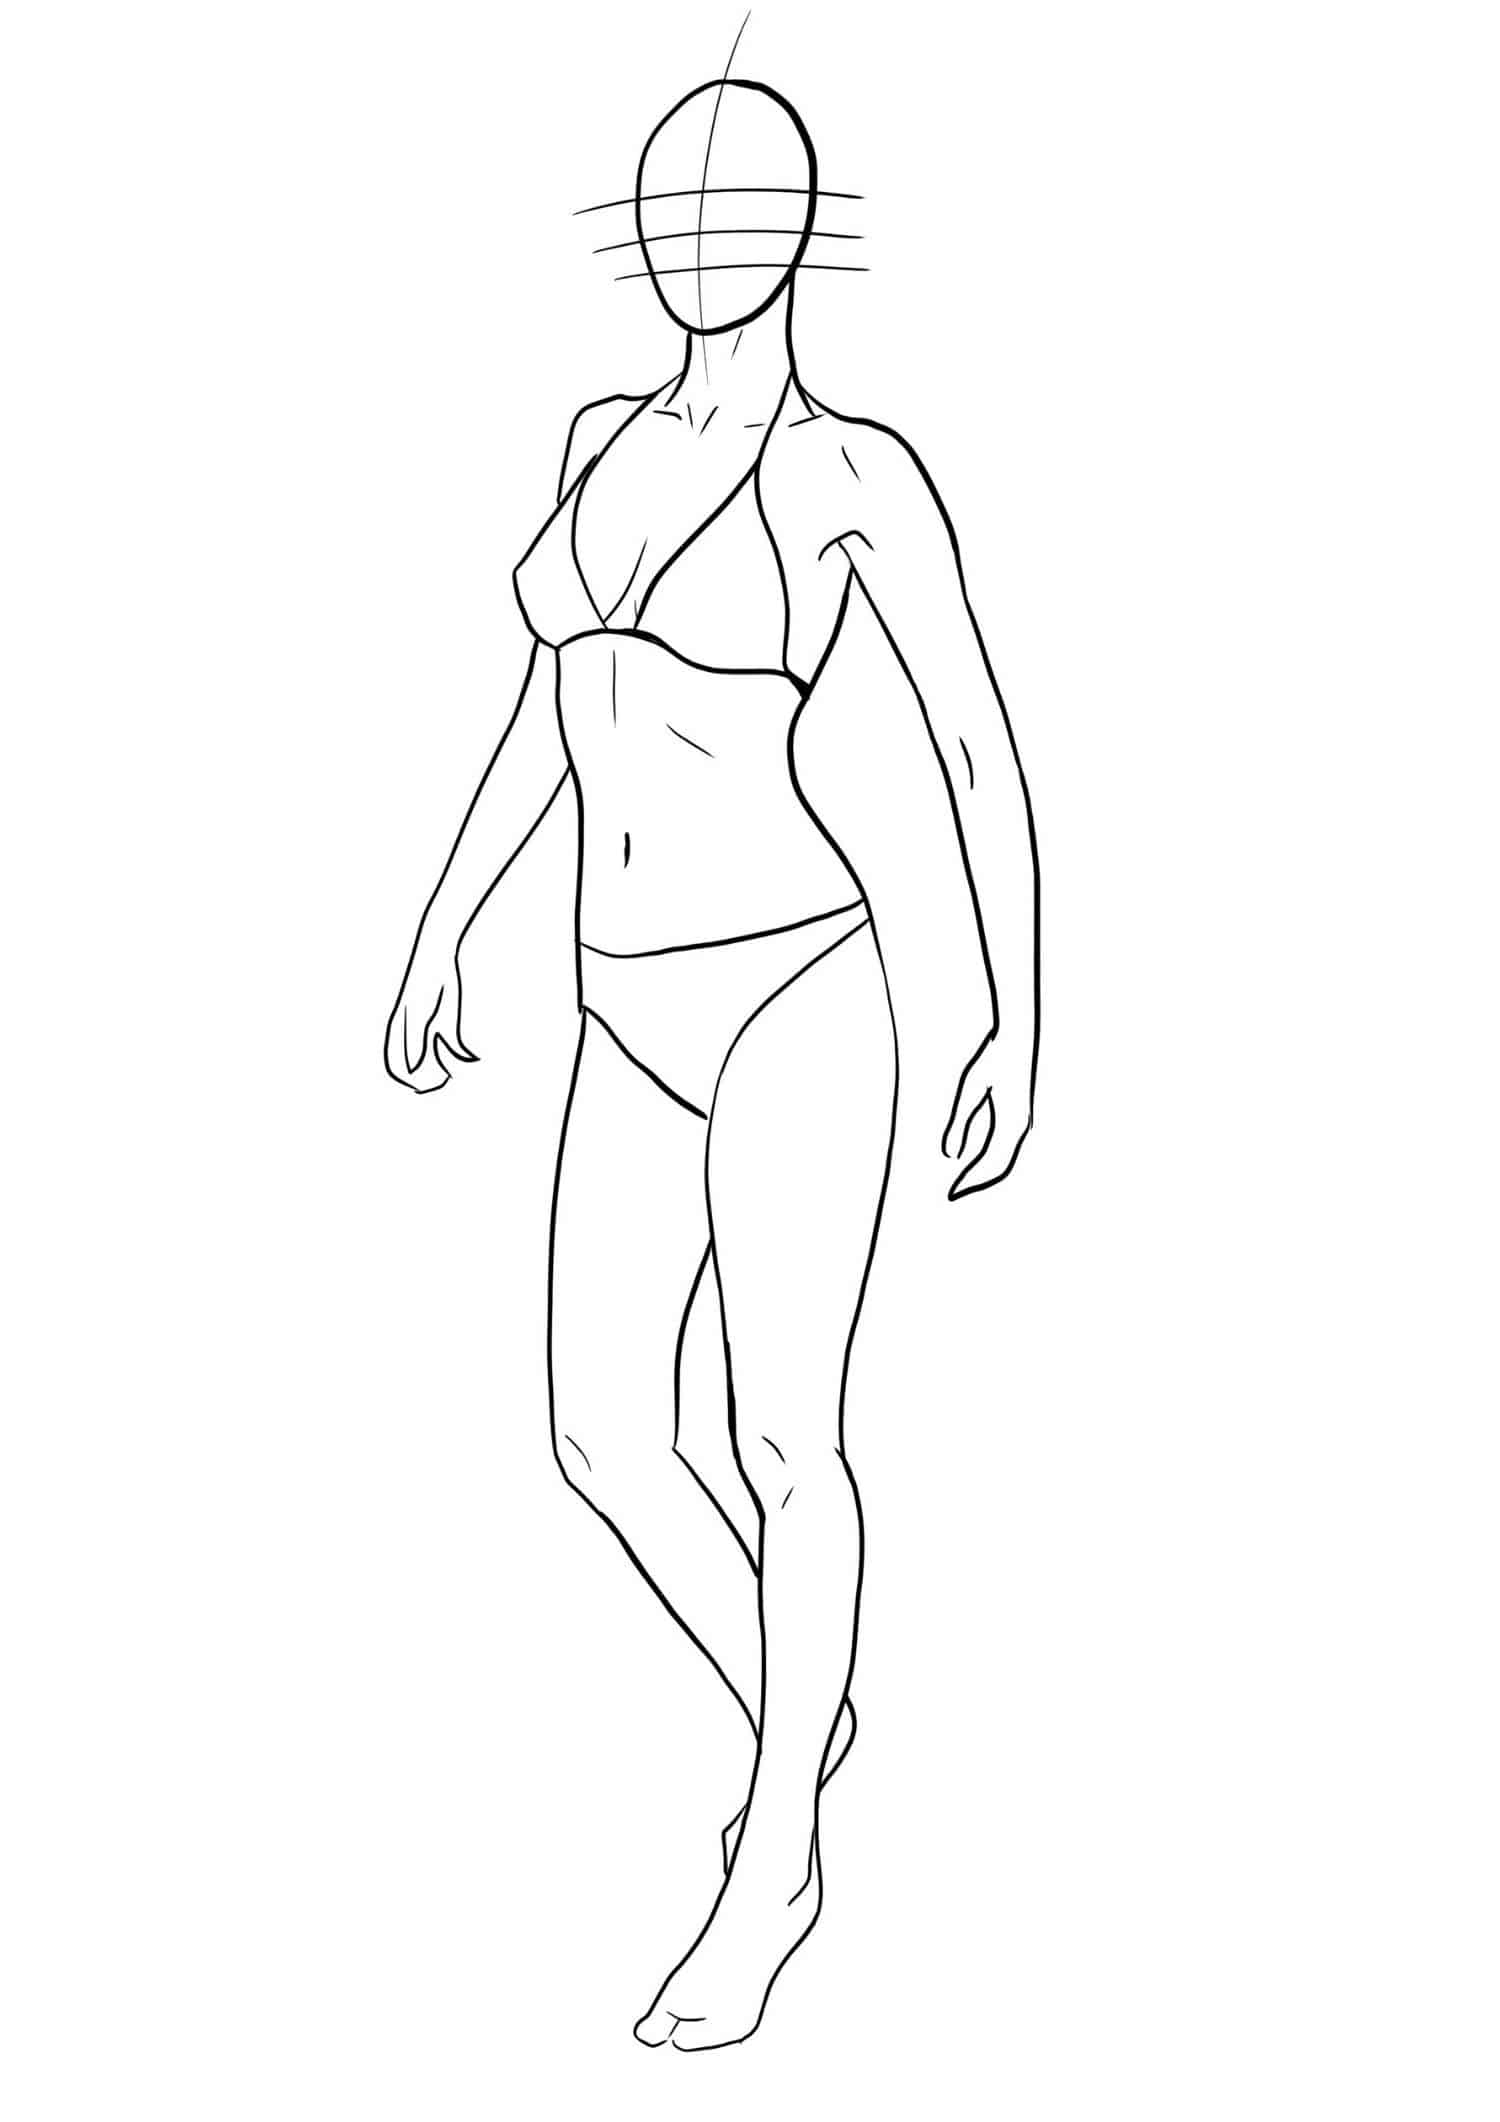 Standing Poses Reference How To Draw The Human Figure In A Standing Position Artsydee